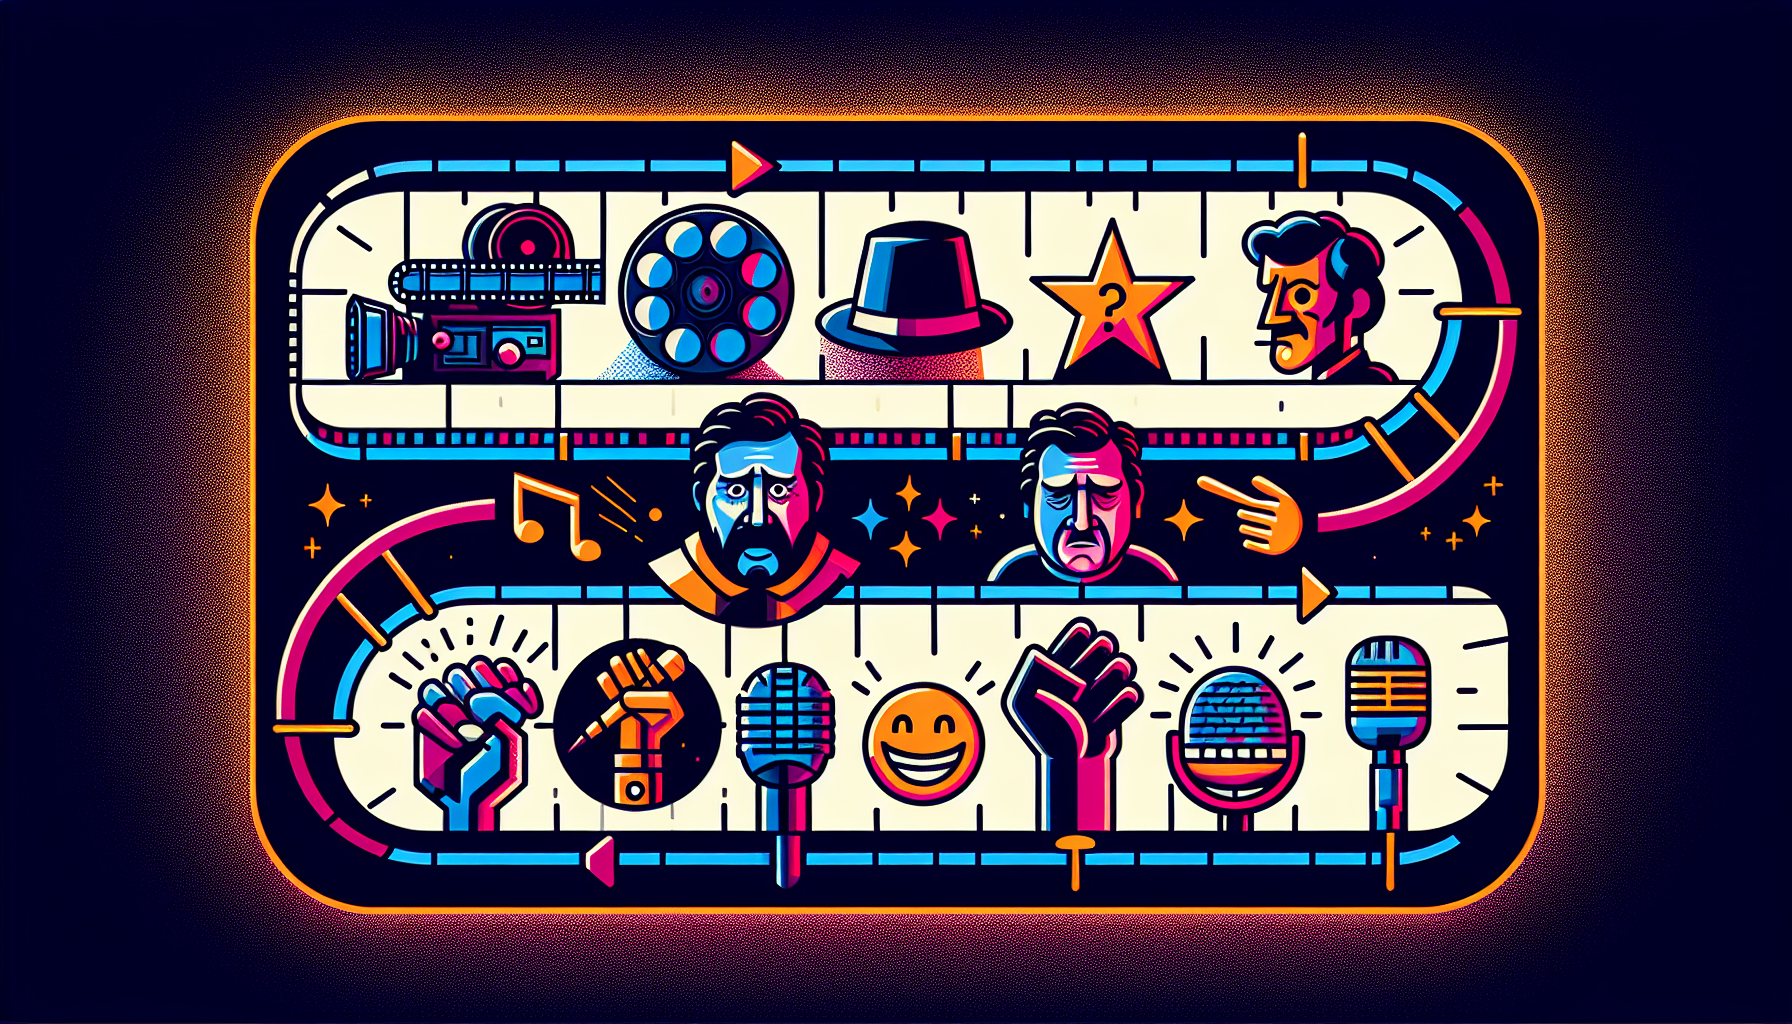 A visual timeline of comedy, with icons representing various eras. At one end, we see an icon symbolizing classic comedy with a film roll and a hat, a nod to the era of Mel Brooks. Transitioning along the timeline, we reach an icon symbolizing modern comedy with a microphone and a smiley emoji, representing the era of Judd Apatow equivalents. The design is vibrant, full of color and possesses a contemporary style.